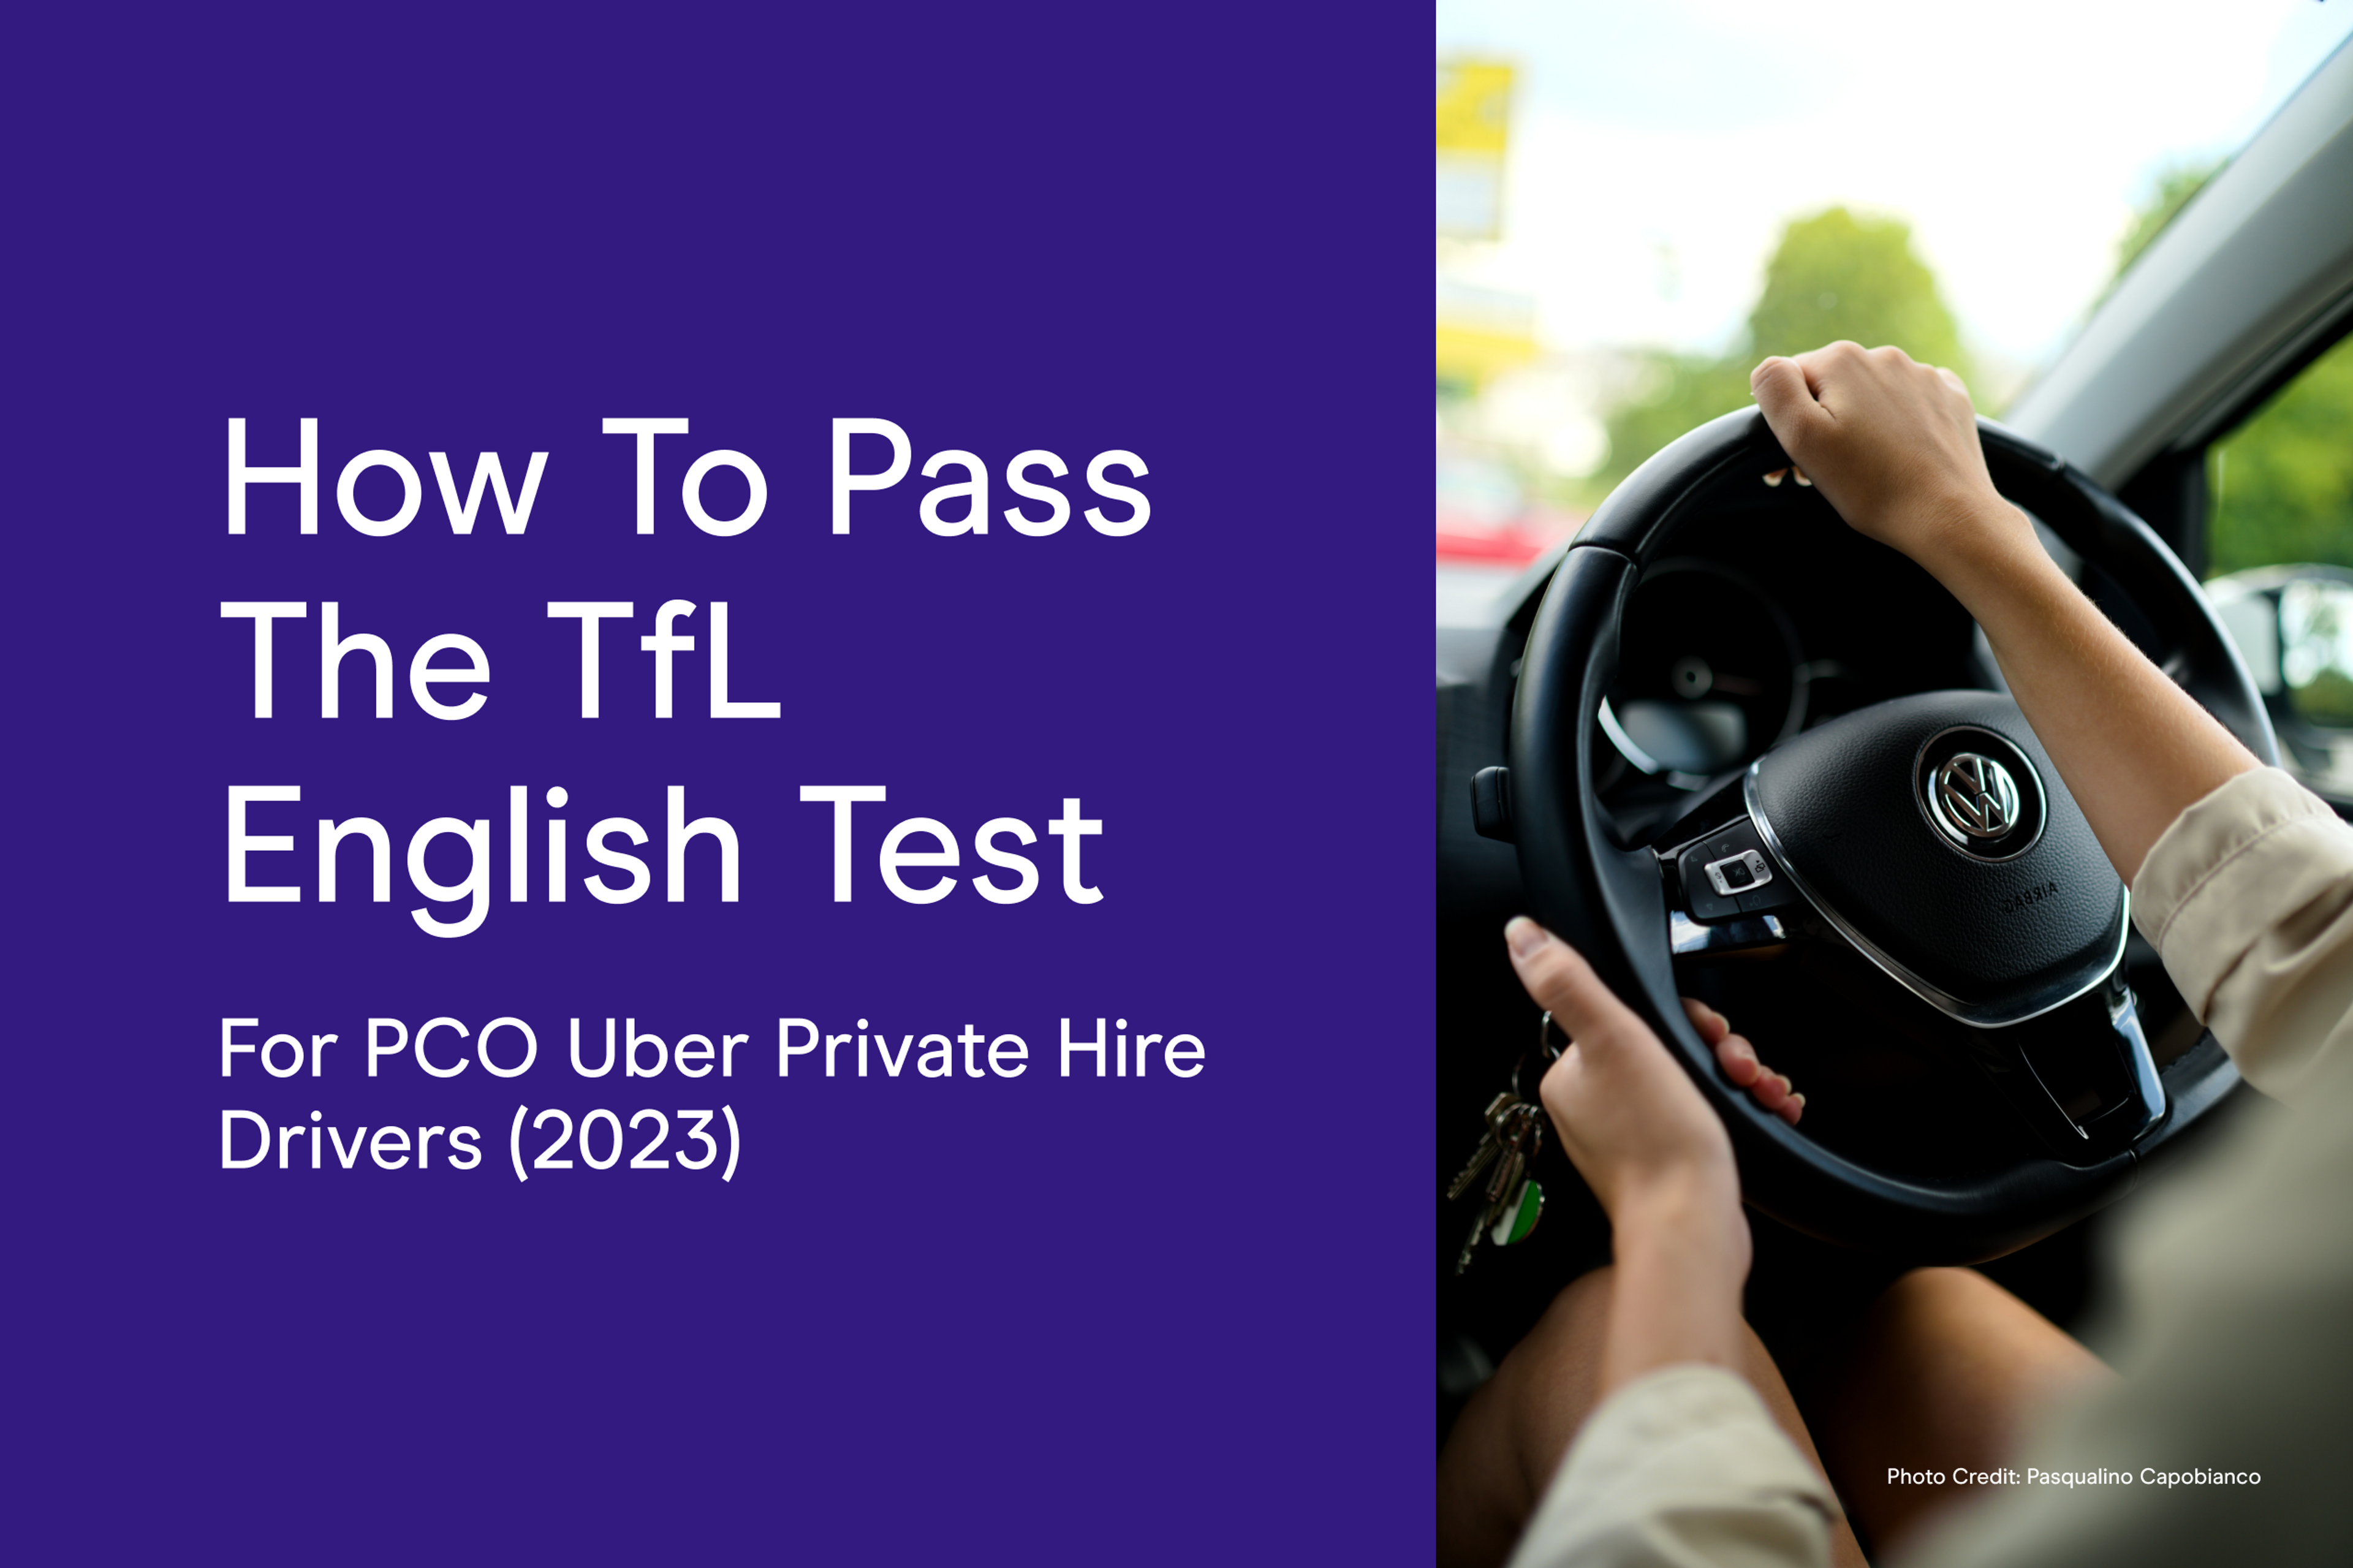 How to pass the TfL English Test for PCO Uber private hire drivers (2023)